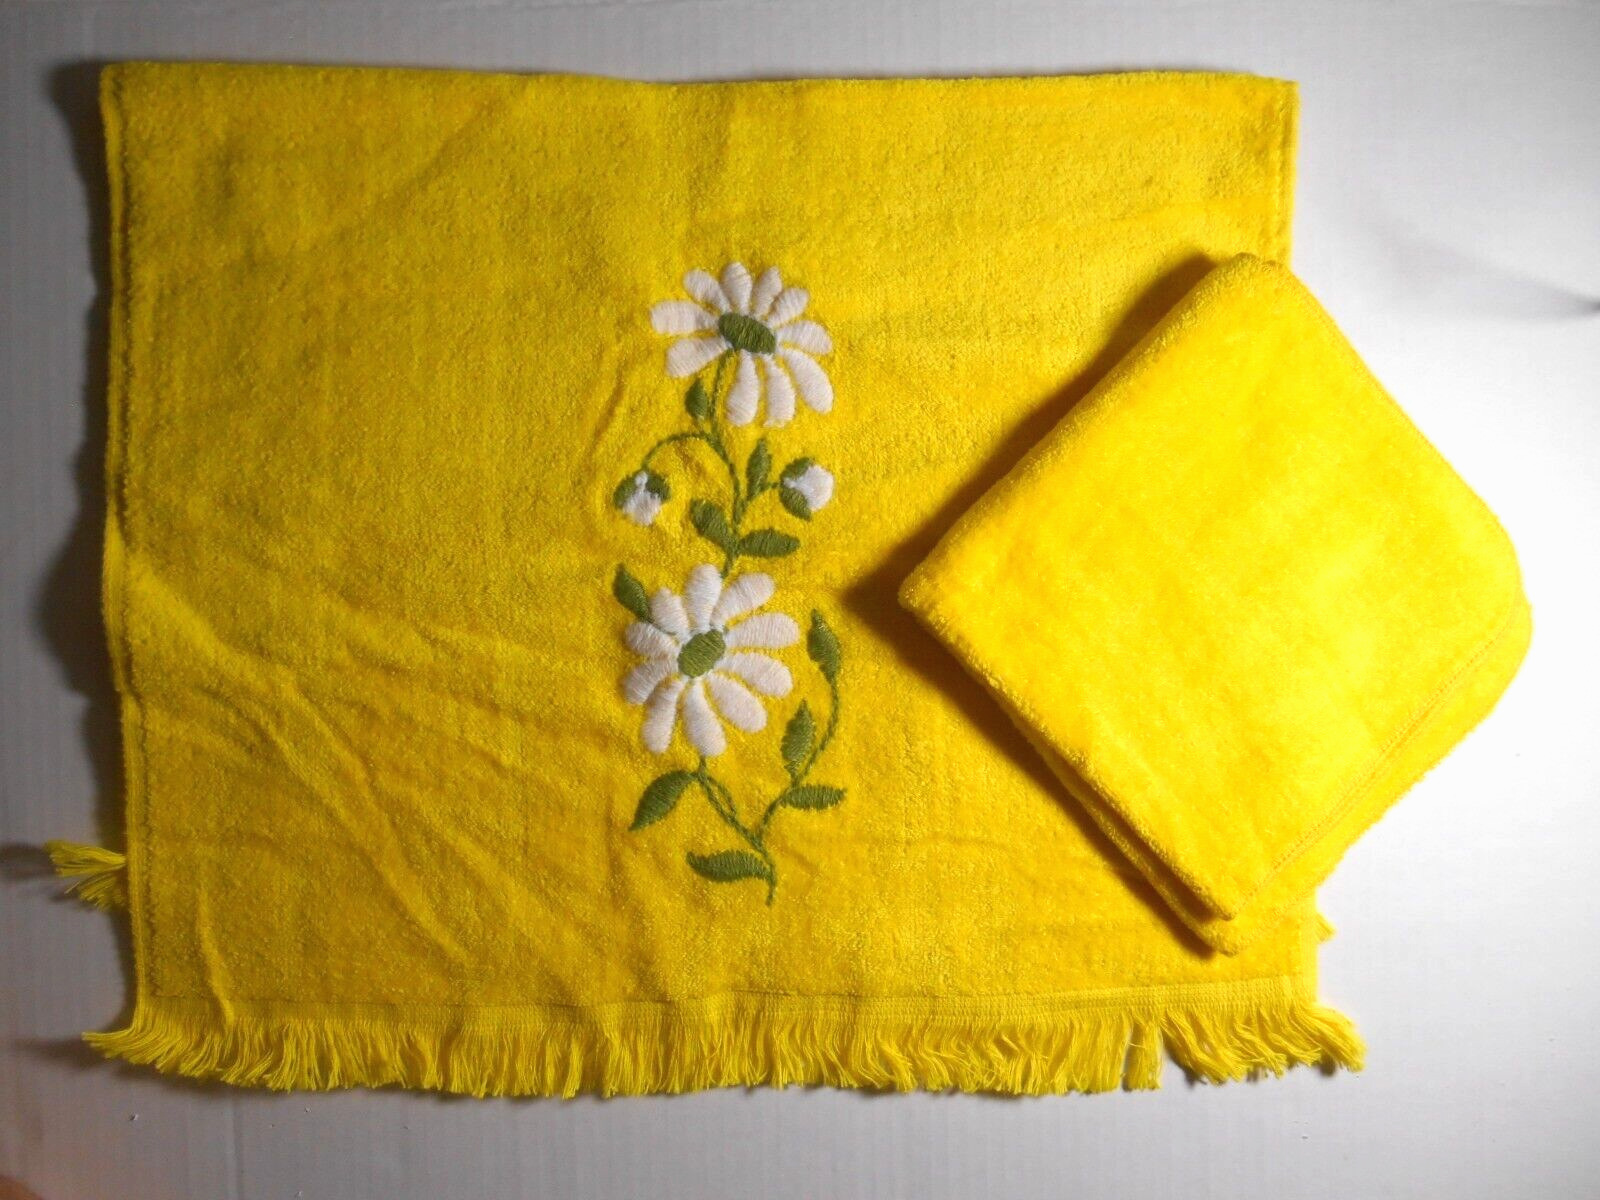 VTG Pequot White Daisy Embroidered Yellow Cotton Hand Towel & Washcloth UNUSED